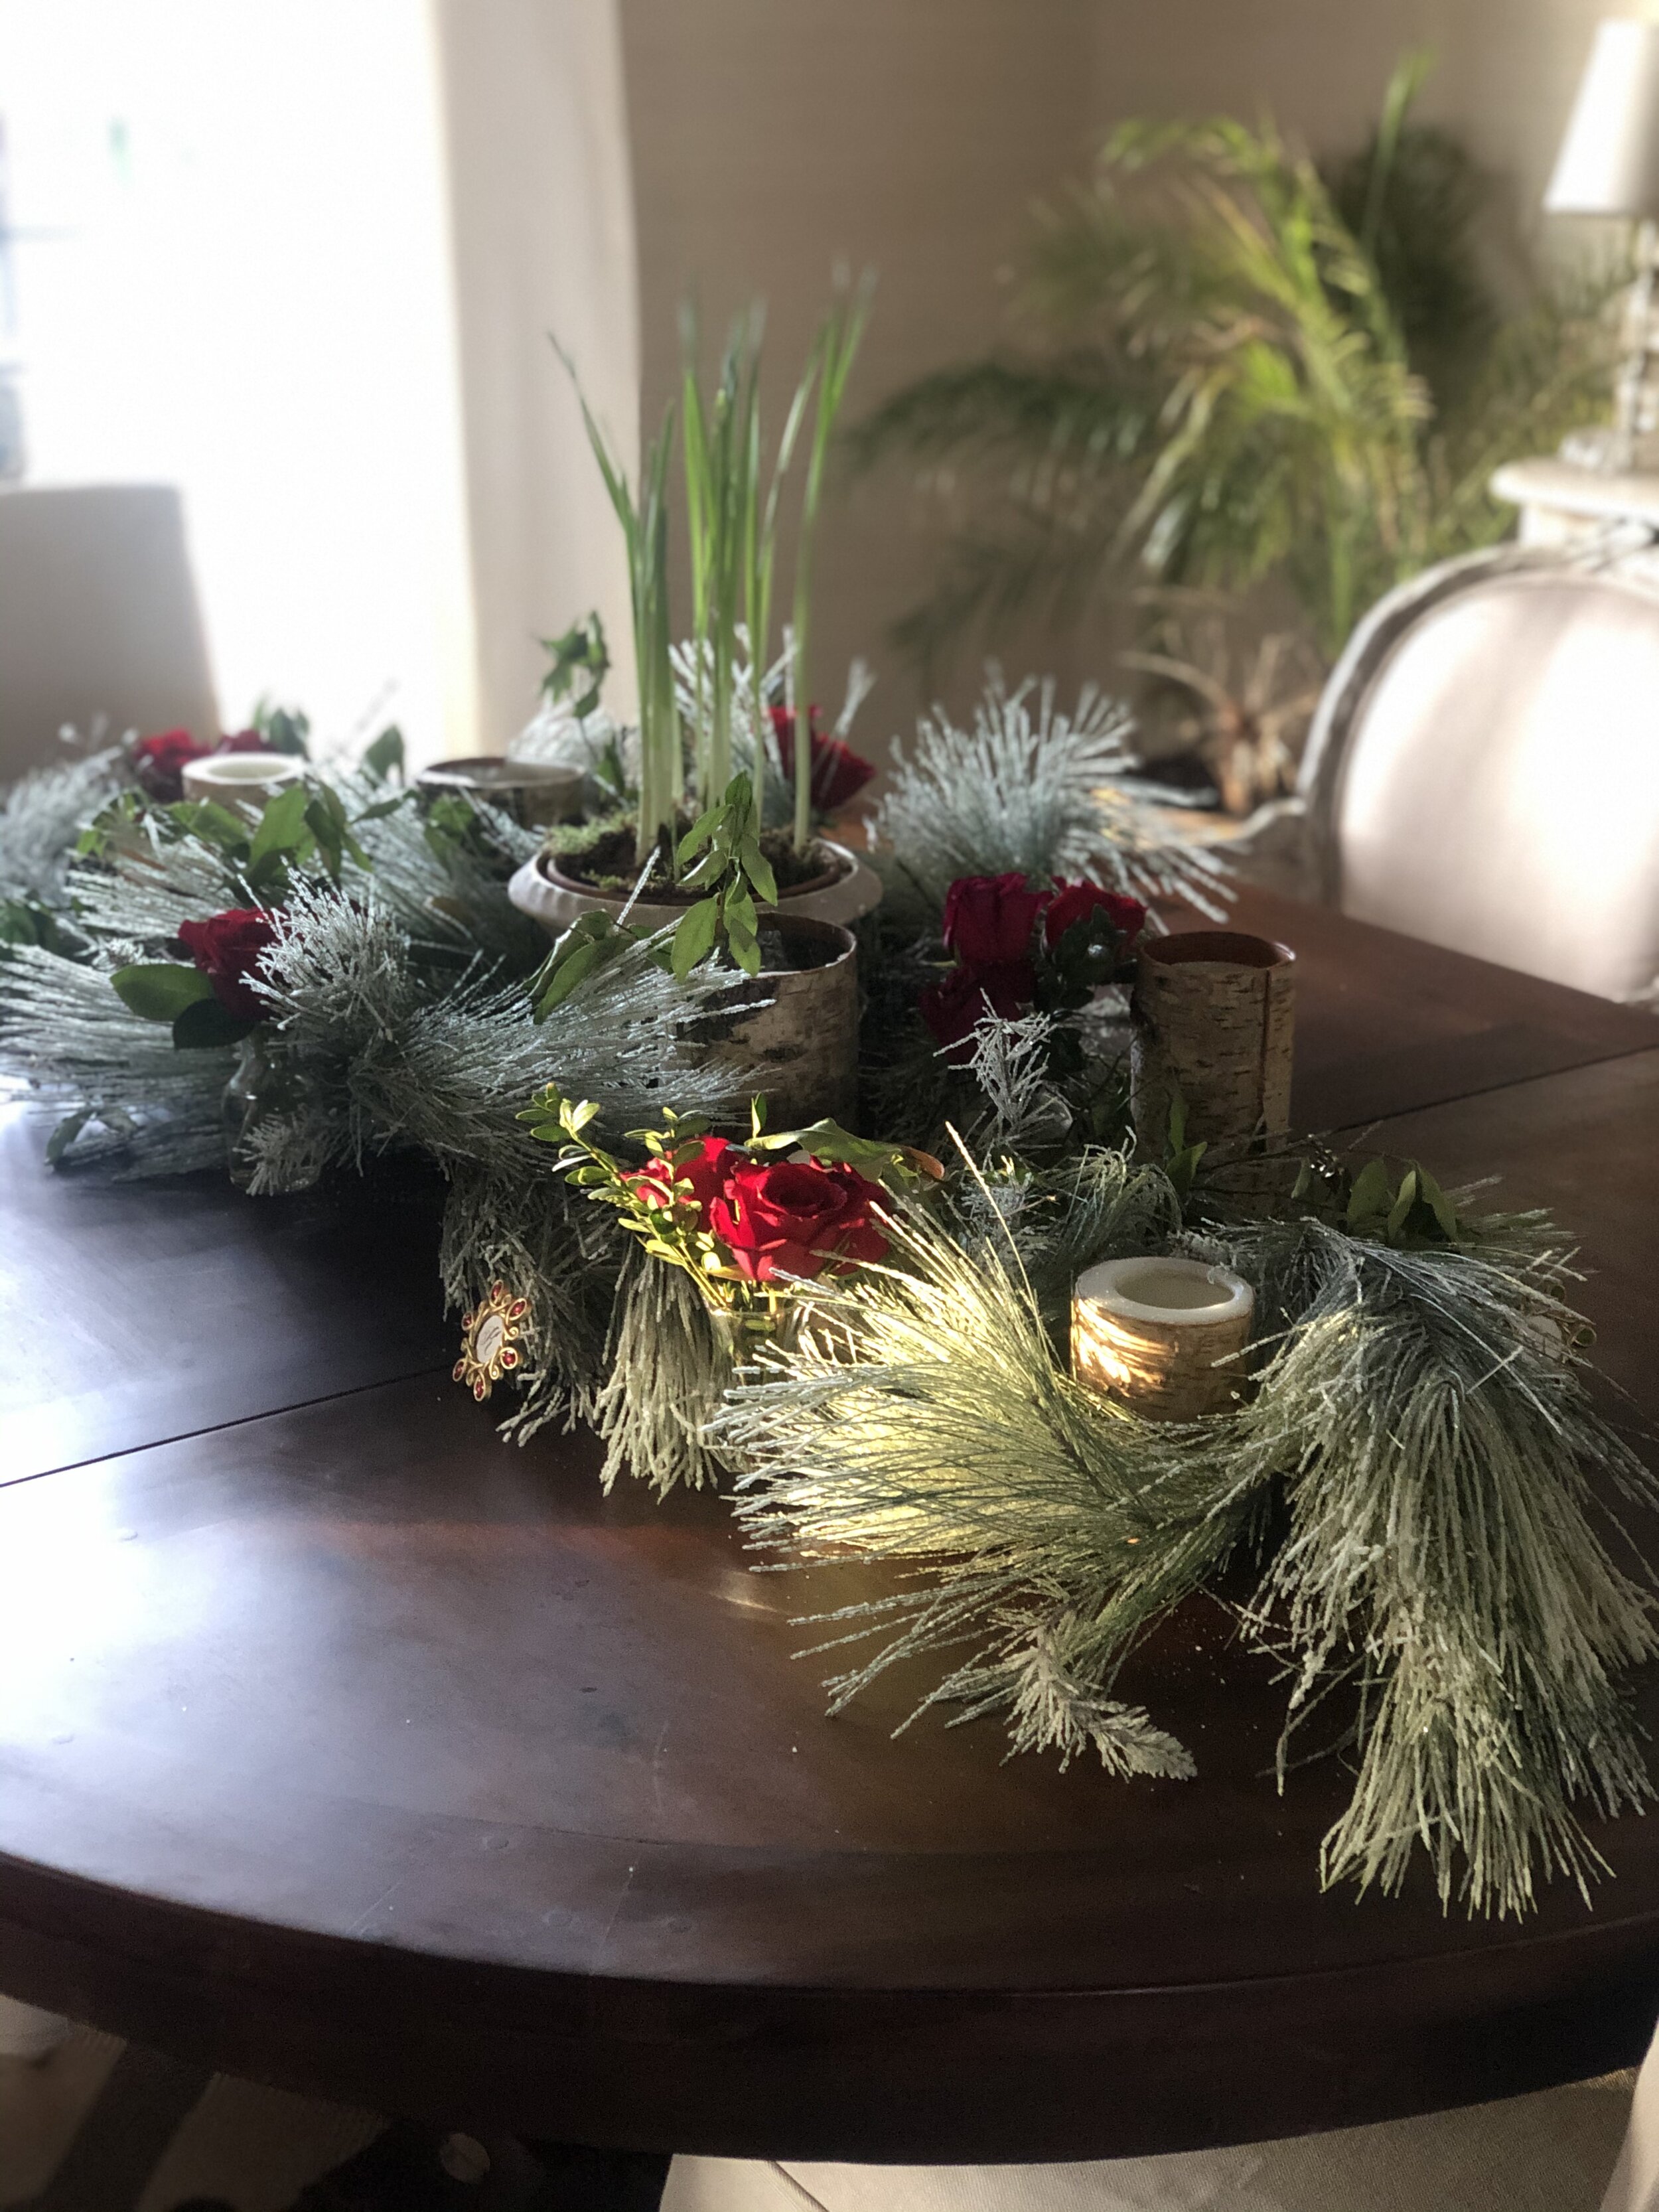 I love being able to add a leaf to our dining table as more are here to gather with us; I added this flocked greenery, birch candles and red roses to make it festive